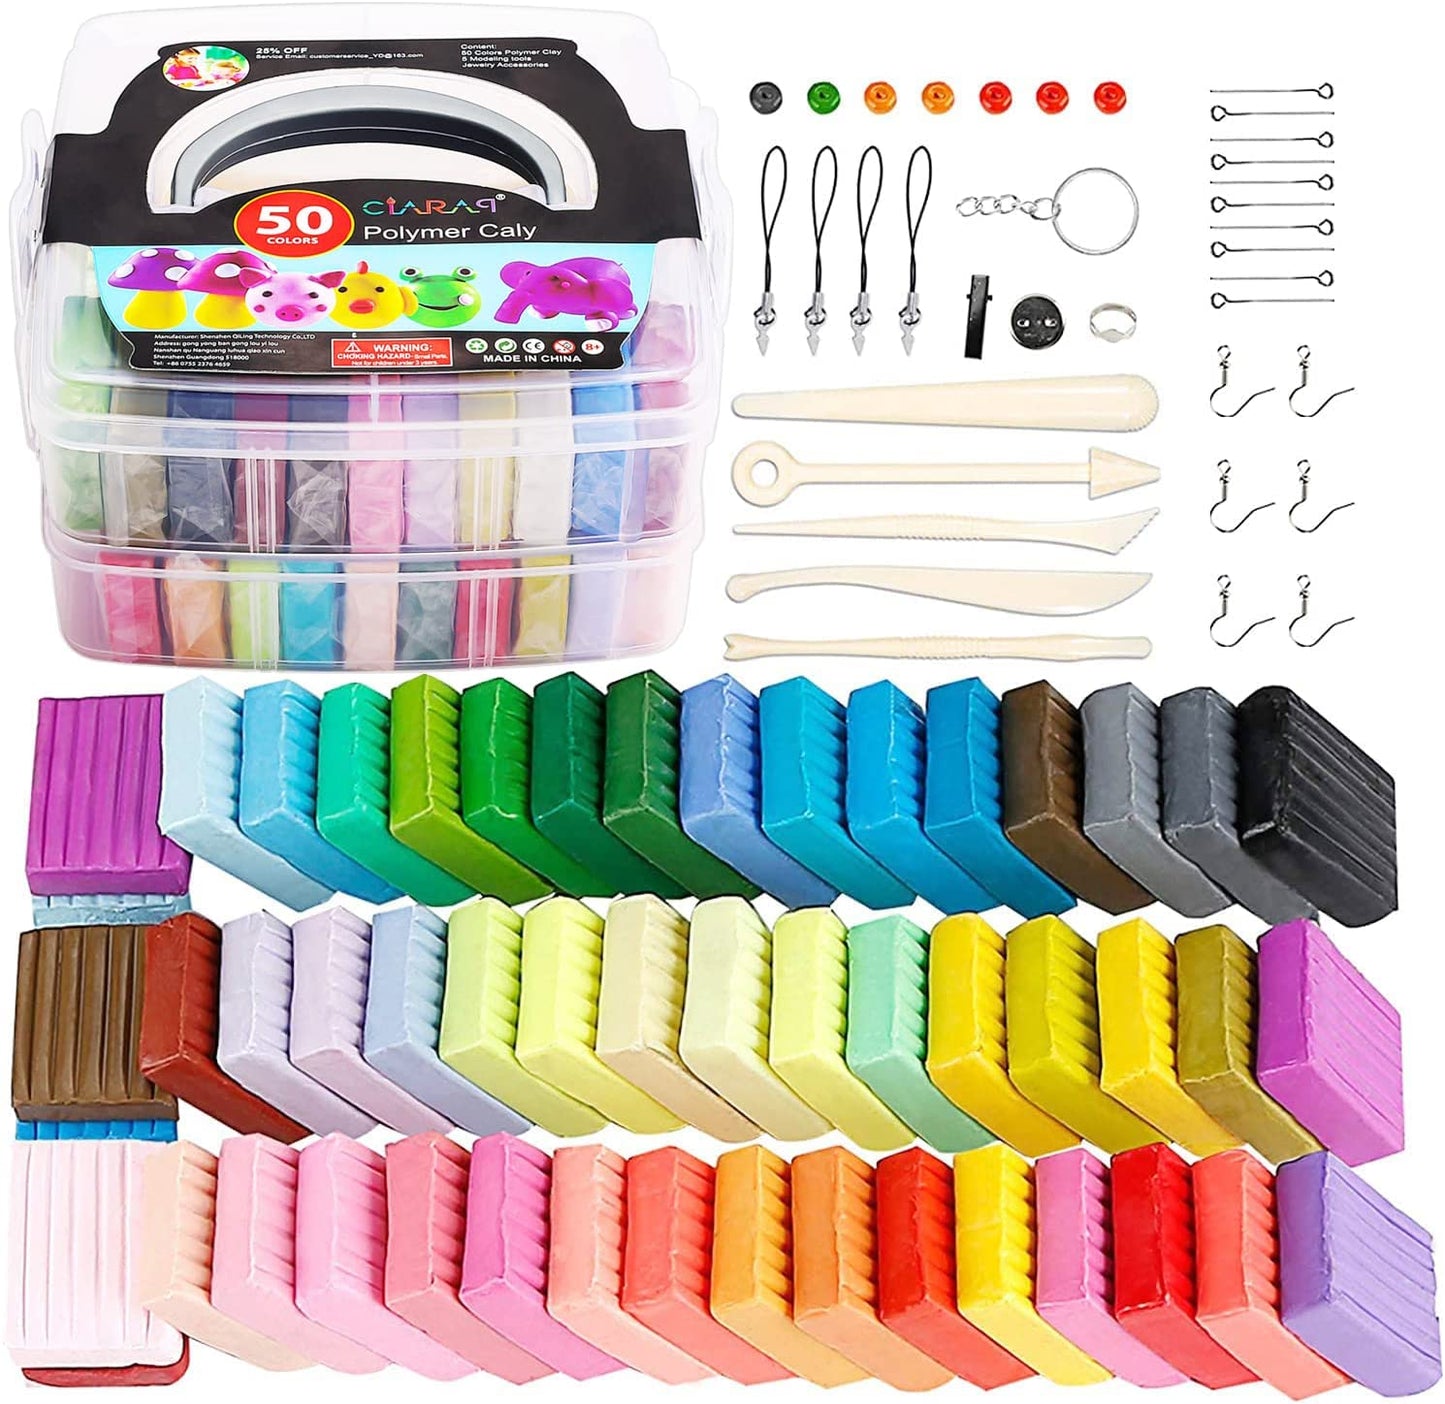 Polymer Clay Kits for DIY Modeling Oven Bake Model Safe and Non-Toxic  Sculpting Tools and Accessories Ideal Gift for Children Adults and Artists  (50 Color) 50-1